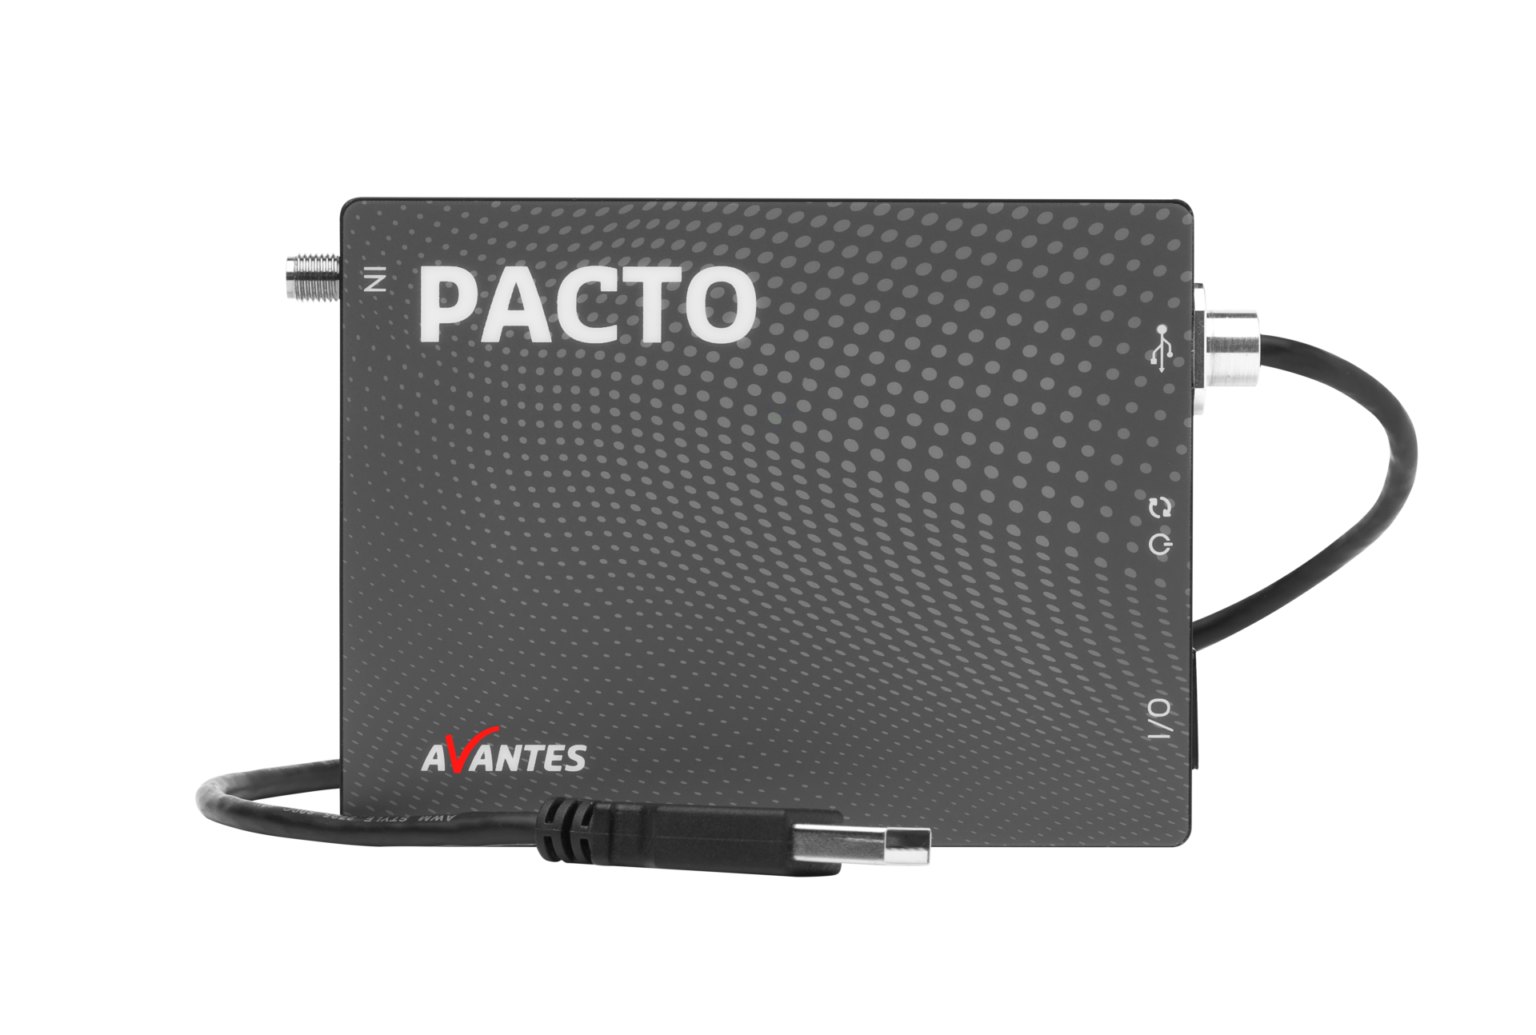 The Pacto spectrometer from Avantes 